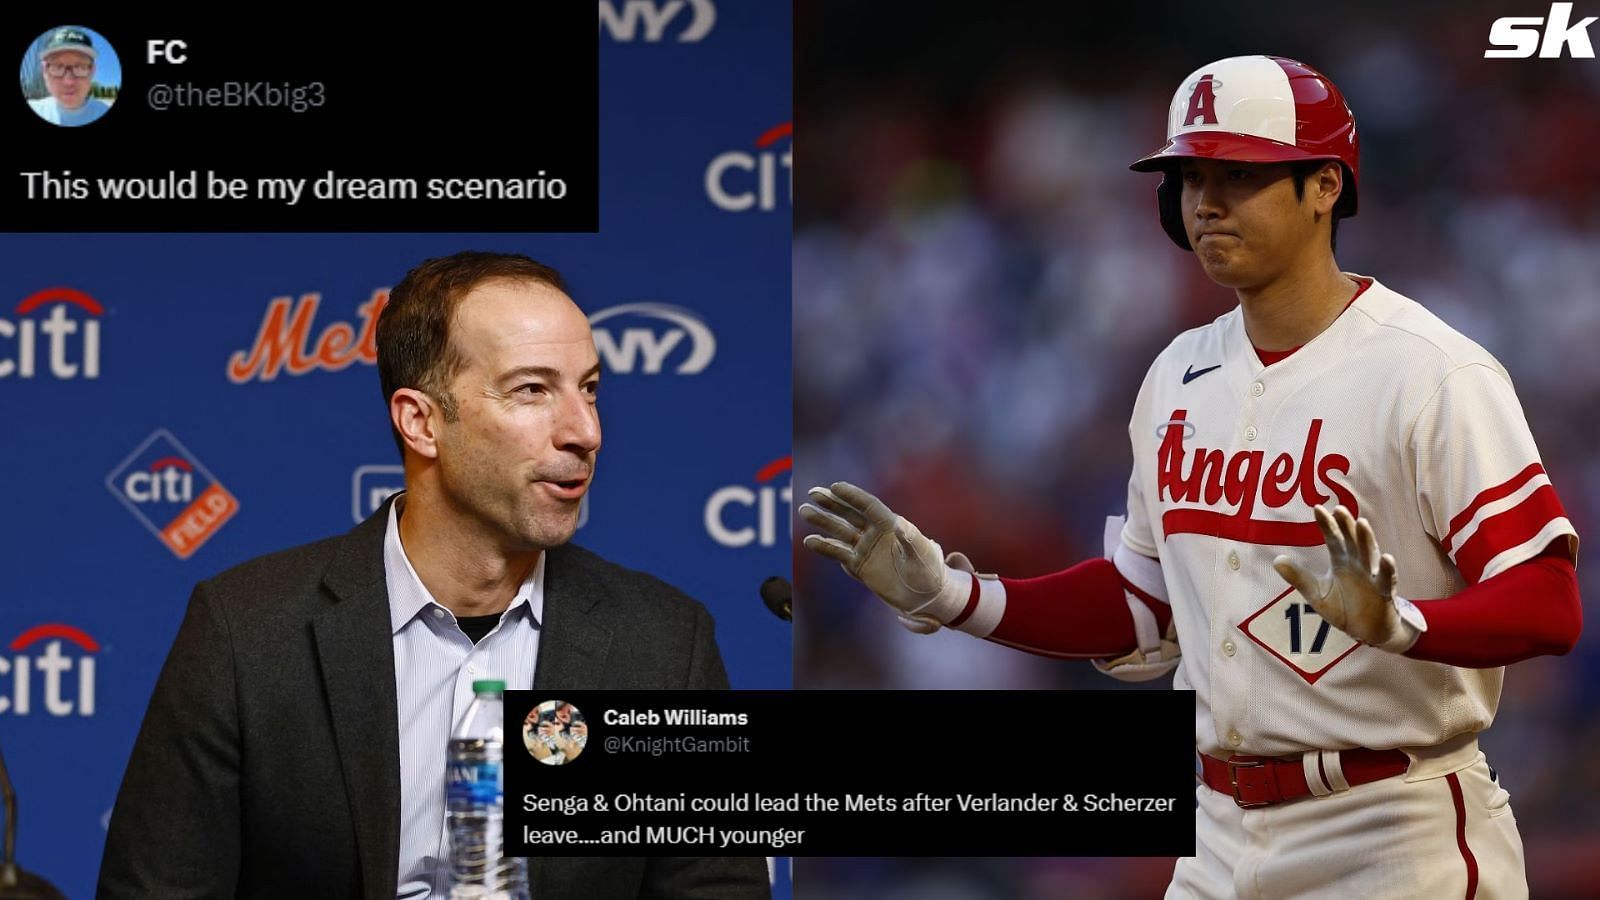 Mets Fans Should Be Excited About Latest Shohei Ohtani News; Could